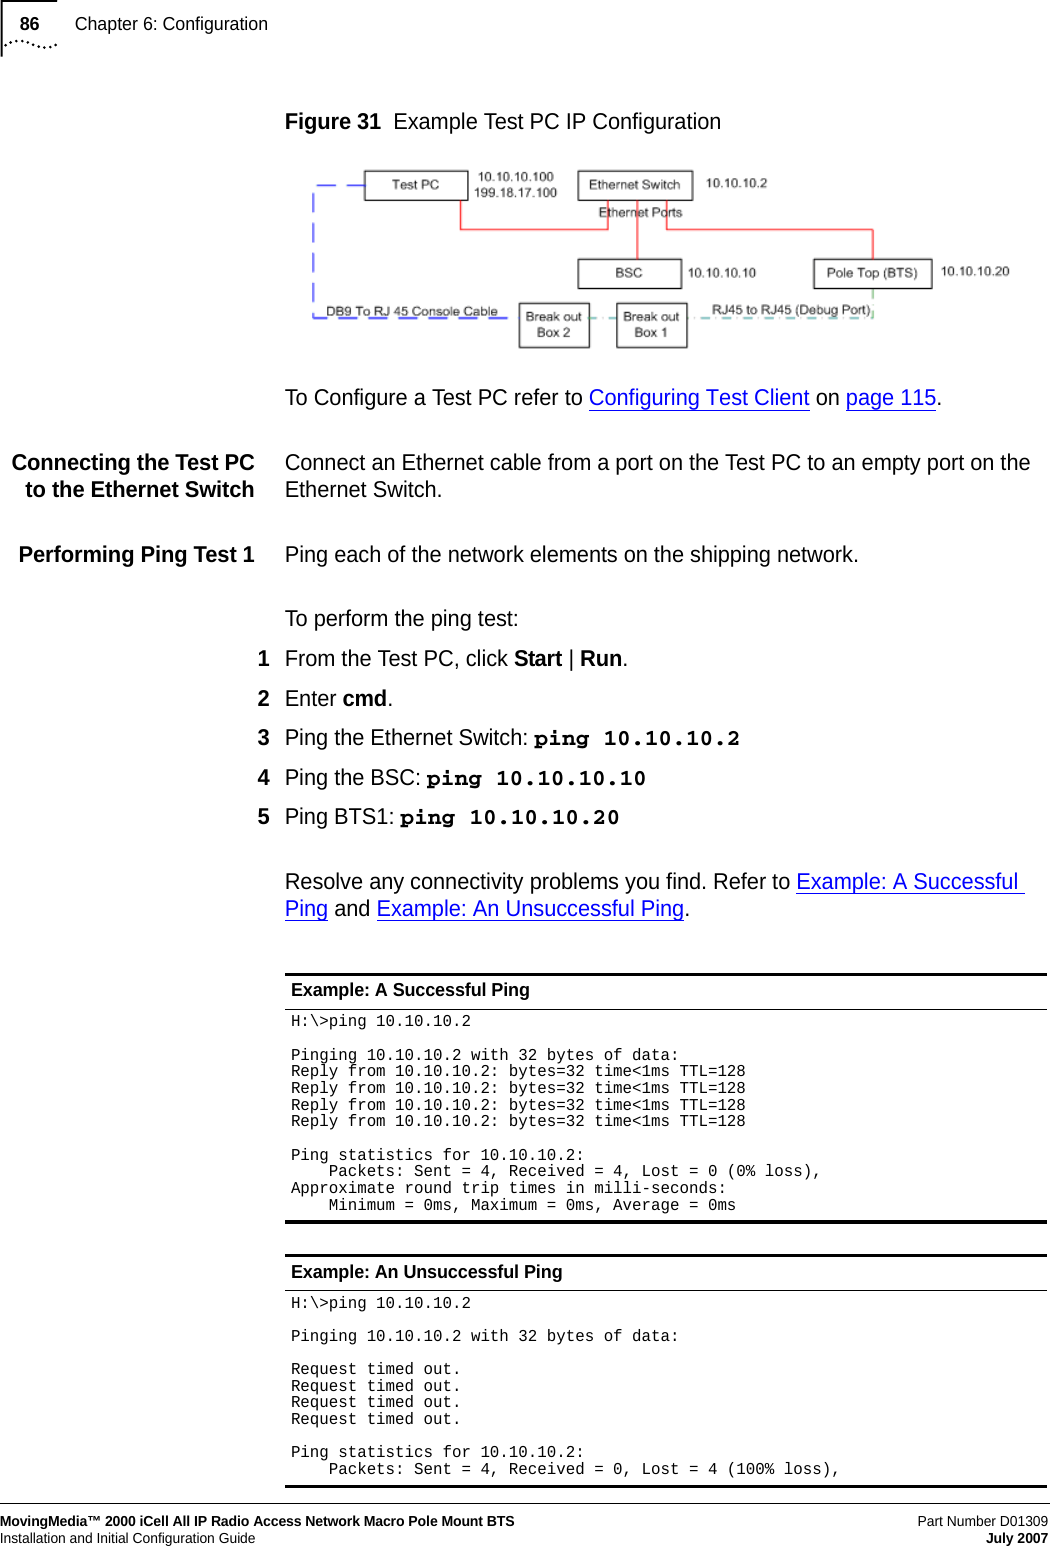 86Chapter 6: ConfigurationMovingMedia™ 2000 iCell All IP Radio Access Network Macro Pole Mount BTSPart Number D01309 Installation and Initial Configuration Guide July 2007Figure 31  Example Test PC IP ConfigurationTo Configure a Test PC refer to Configuring Test Client on page 115.Connecting the Test PC   to the Ethernet Switch   Connect an Ethernet cable from a port on the Test PC to an empty port on the Ethernet Switch.Performing Ping Test 1   Ping each of the network elements on the shipping network.To perform the ping test:1From the Test PC, click Start | Run.2Enter cmd.3Ping the Ethernet Switch: ping 10.10.10.24Ping the BSC: ping 10.10.10.105Ping BTS1: ping 10.10.10.20Resolve any connectivity problems you find. Refer to Example: A Successful Ping and Example: An Unsuccessful Ping.Example: A Successful PingH:\&gt;ping 10.10.10.2Pinging 10.10.10.2 with 32 bytes of data:Reply from 10.10.10.2: bytes=32 time&lt;1ms TTL=128Reply from 10.10.10.2: bytes=32 time&lt;1ms TTL=128Reply from 10.10.10.2: bytes=32 time&lt;1ms TTL=128Reply from 10.10.10.2: bytes=32 time&lt;1ms TTL=128Ping statistics for 10.10.10.2:    Packets: Sent = 4, Received = 4, Lost = 0 (0% loss),Approximate round trip times in milli-seconds:    Minimum = 0ms, Maximum = 0ms, Average = 0msExample: An Unsuccessful PingH:\&gt;ping 10.10.10.2Pinging 10.10.10.2 with 32 bytes of data:Request timed out.Request timed out.Request timed out.Request timed out.Ping statistics for 10.10.10.2:    Packets: Sent = 4, Received = 0, Lost = 4 (100% loss),